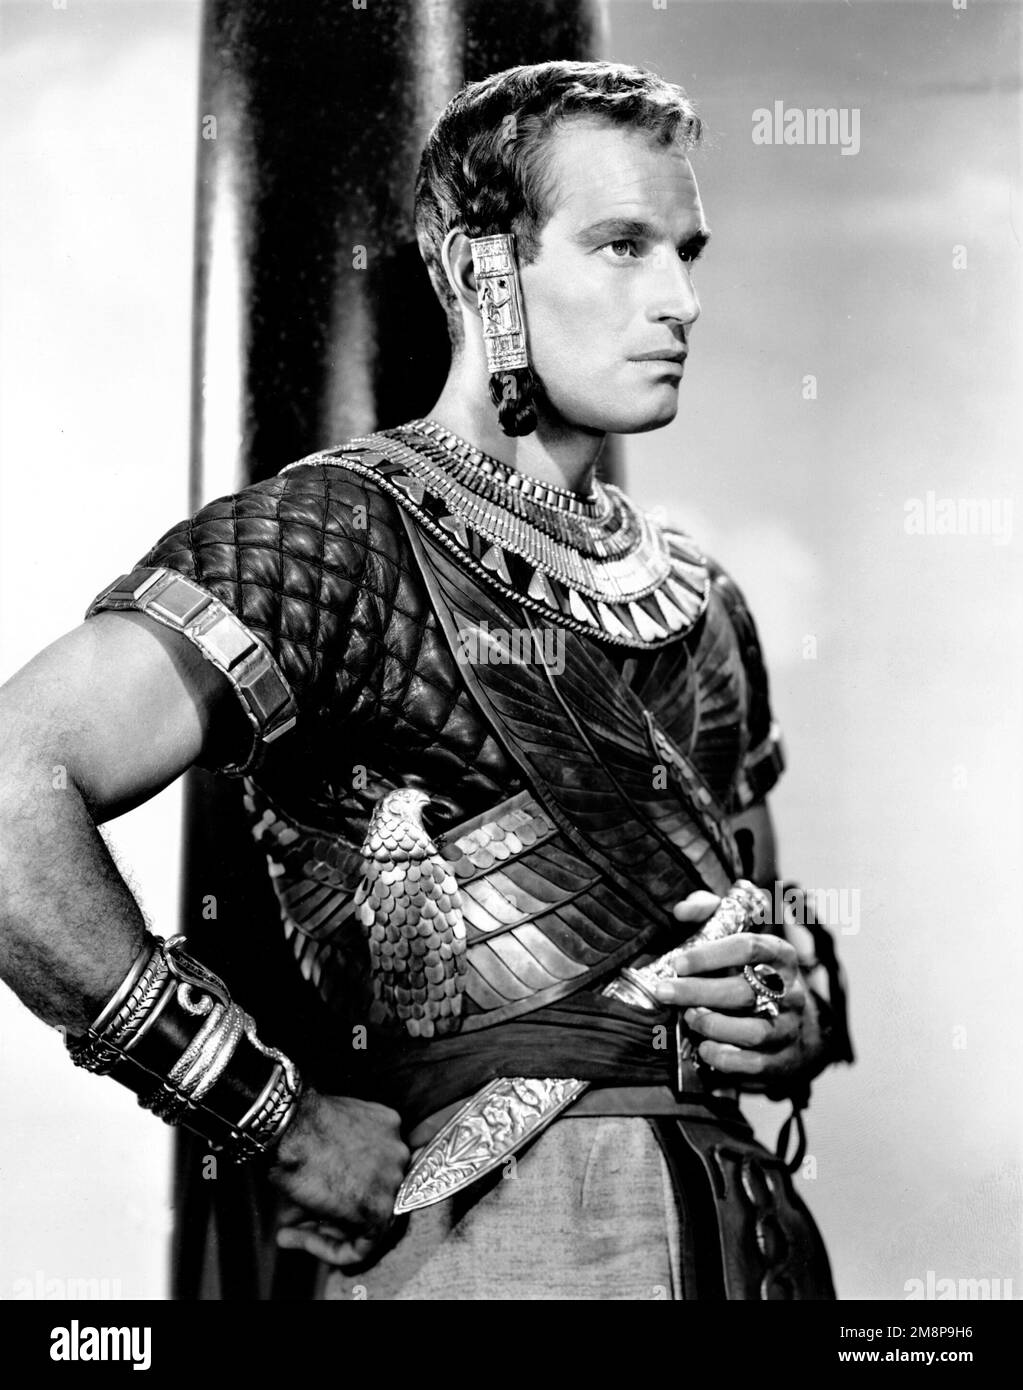 CHARLTON HESTON in THE TEN COMMANDMENTS (1956), directed by CECIL B DEMILLE. Credit: PARAMOUNT PICTURES / Album Stock Photo